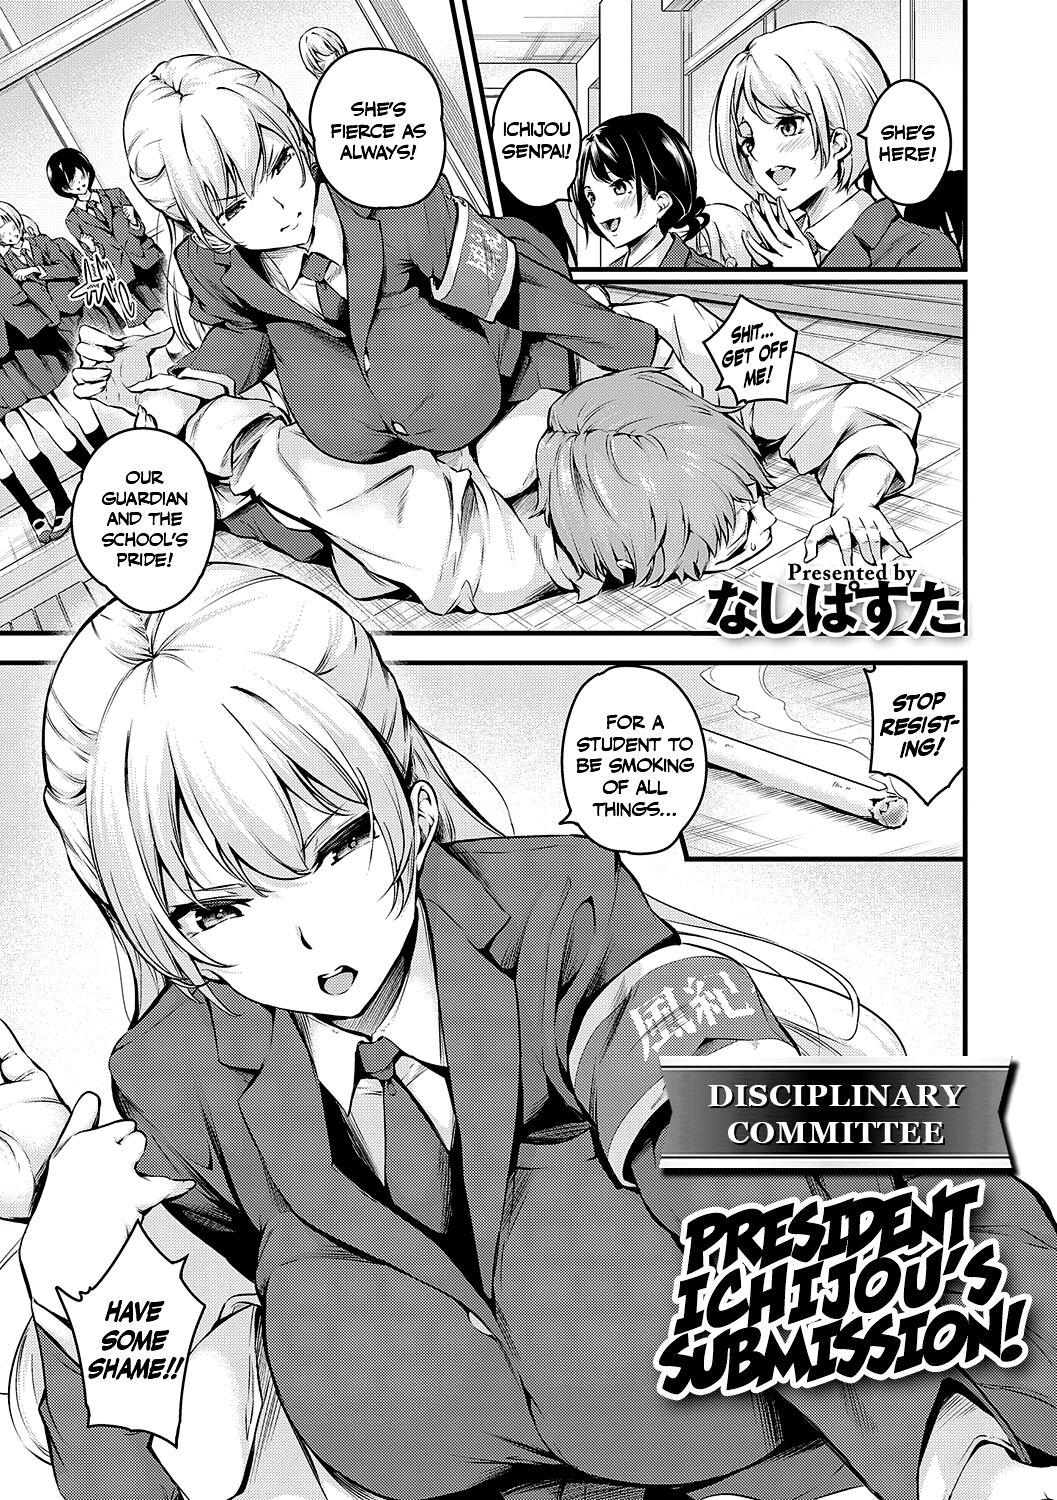 Fuuki Iin Ichijou no Haiboku + After | Disciplinary Committee President Ichijou’s Submission! + After 0